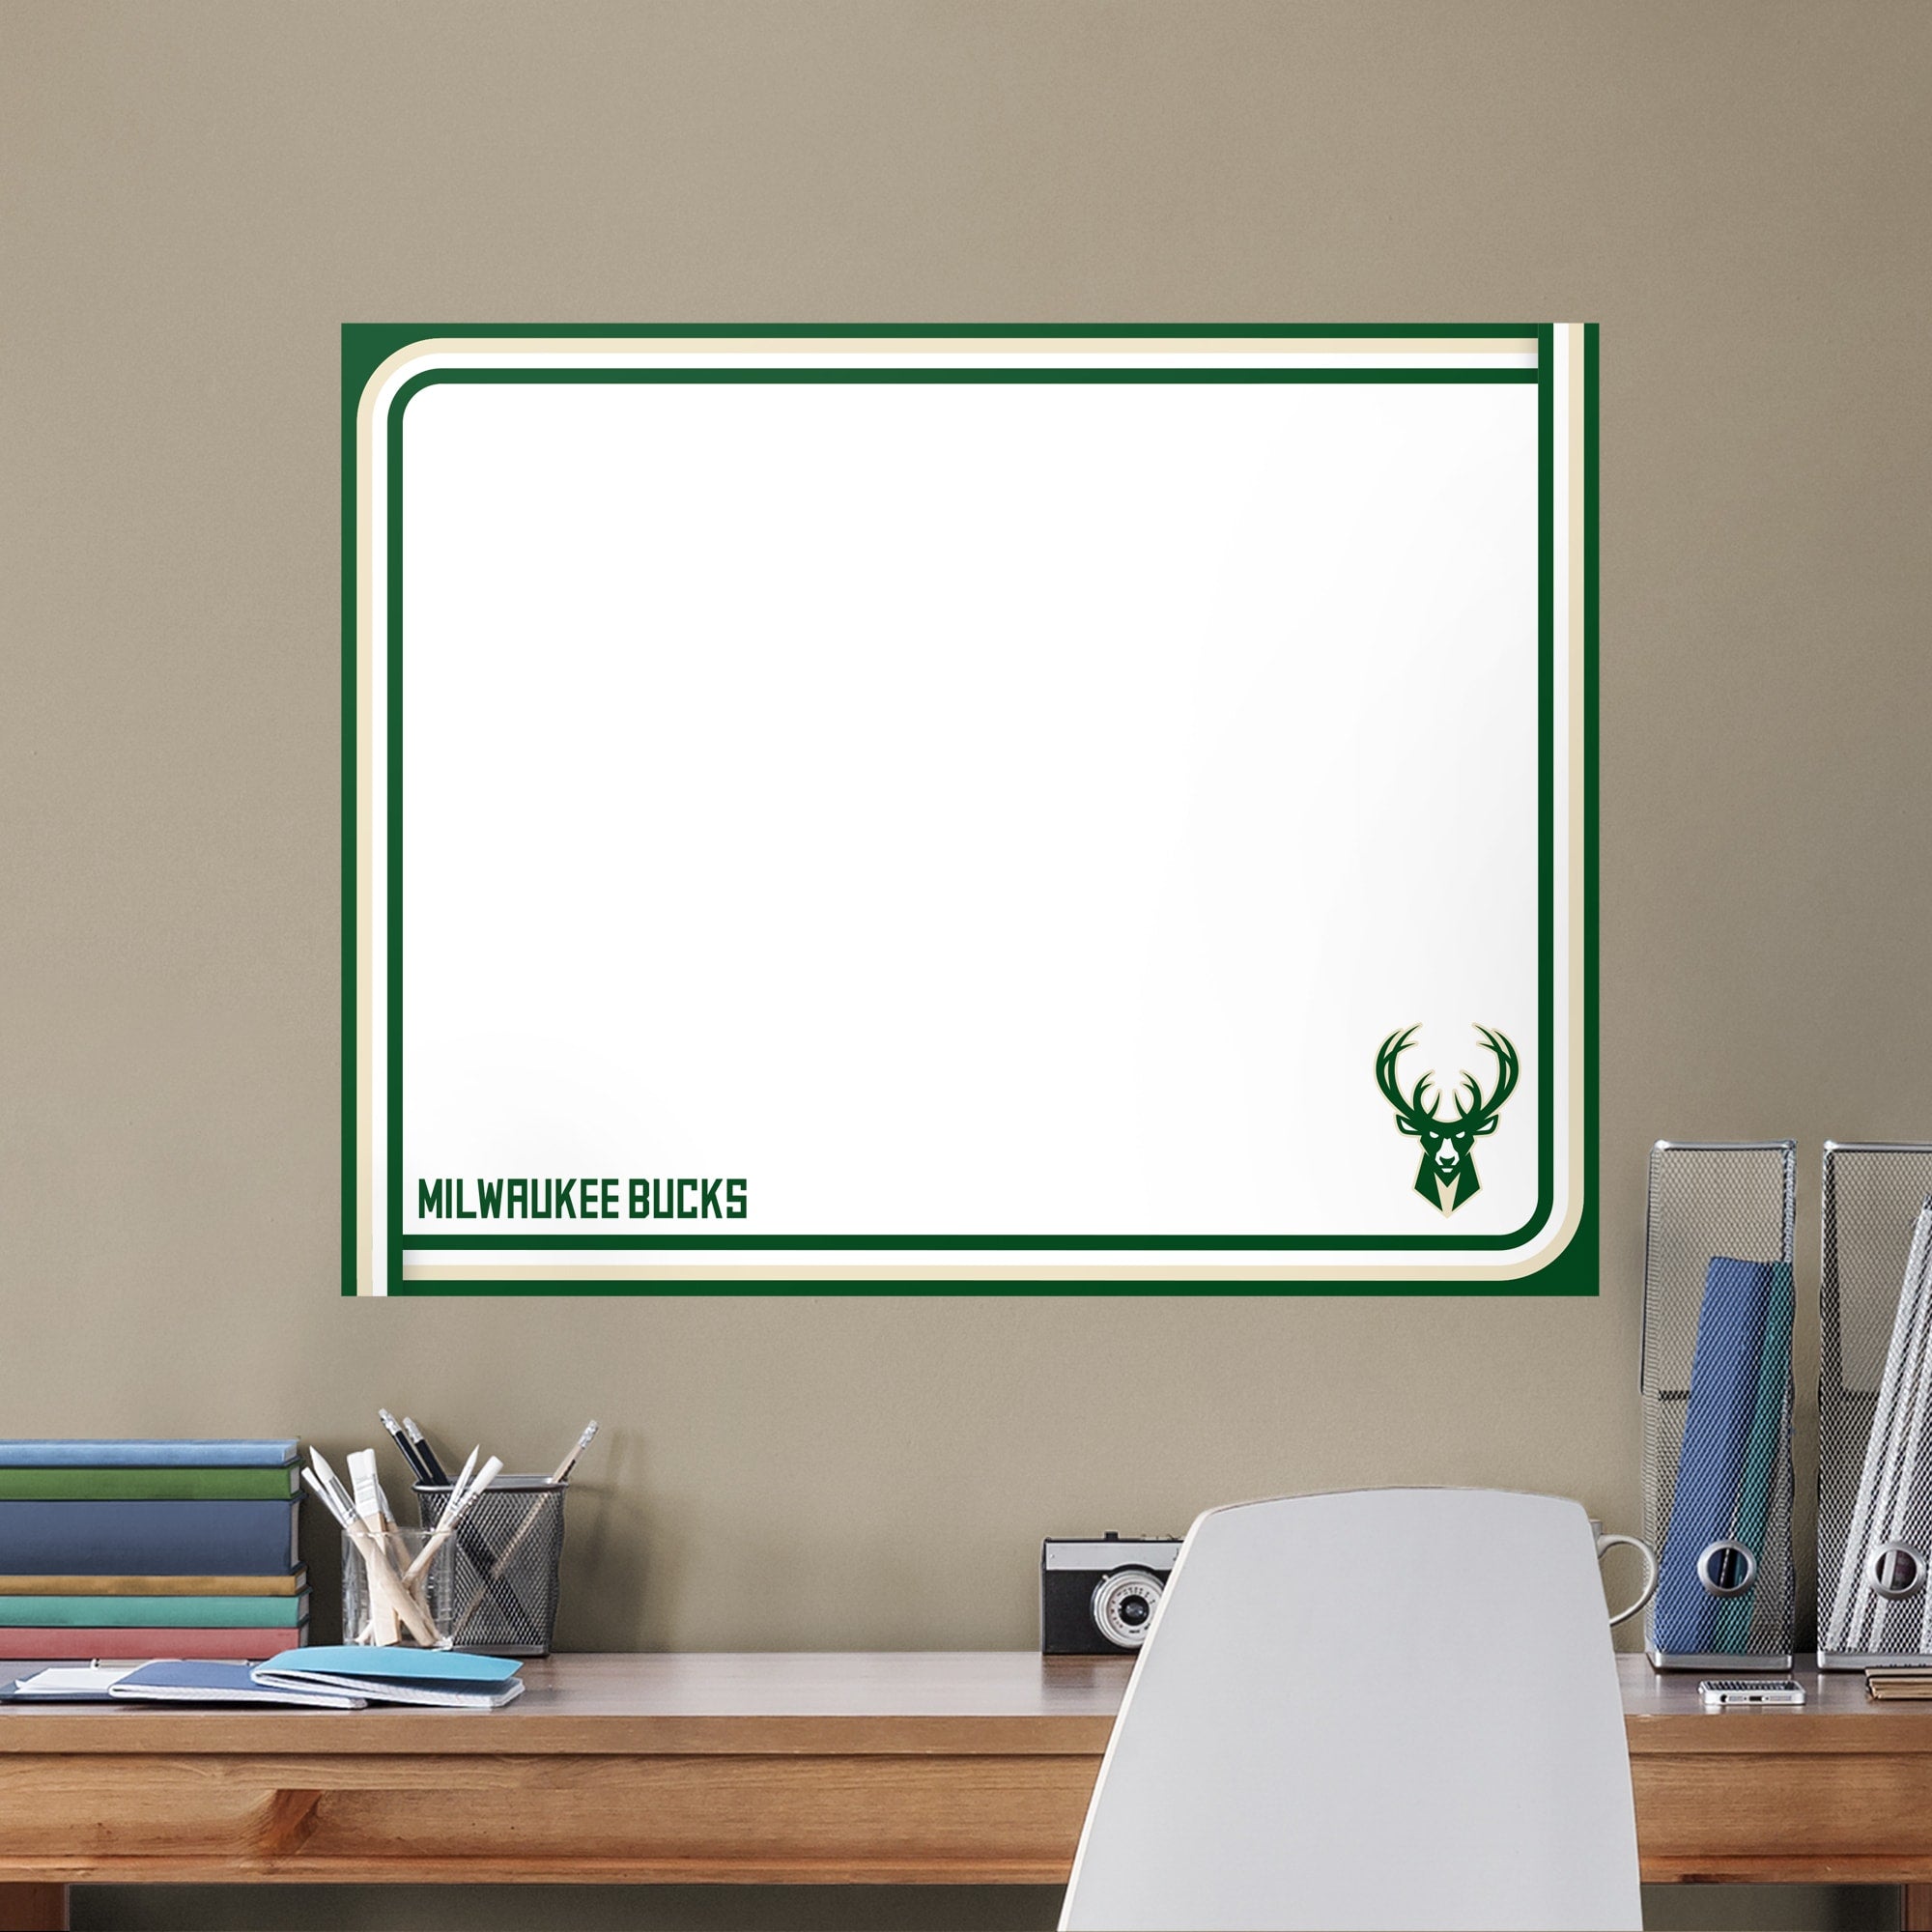 Milwaukee Bucks for Milwaukee Bucks: Dry Erase Whiteboard - Officially Licensed NBA Removable Wall Decal XL by Fathead | Vinyl